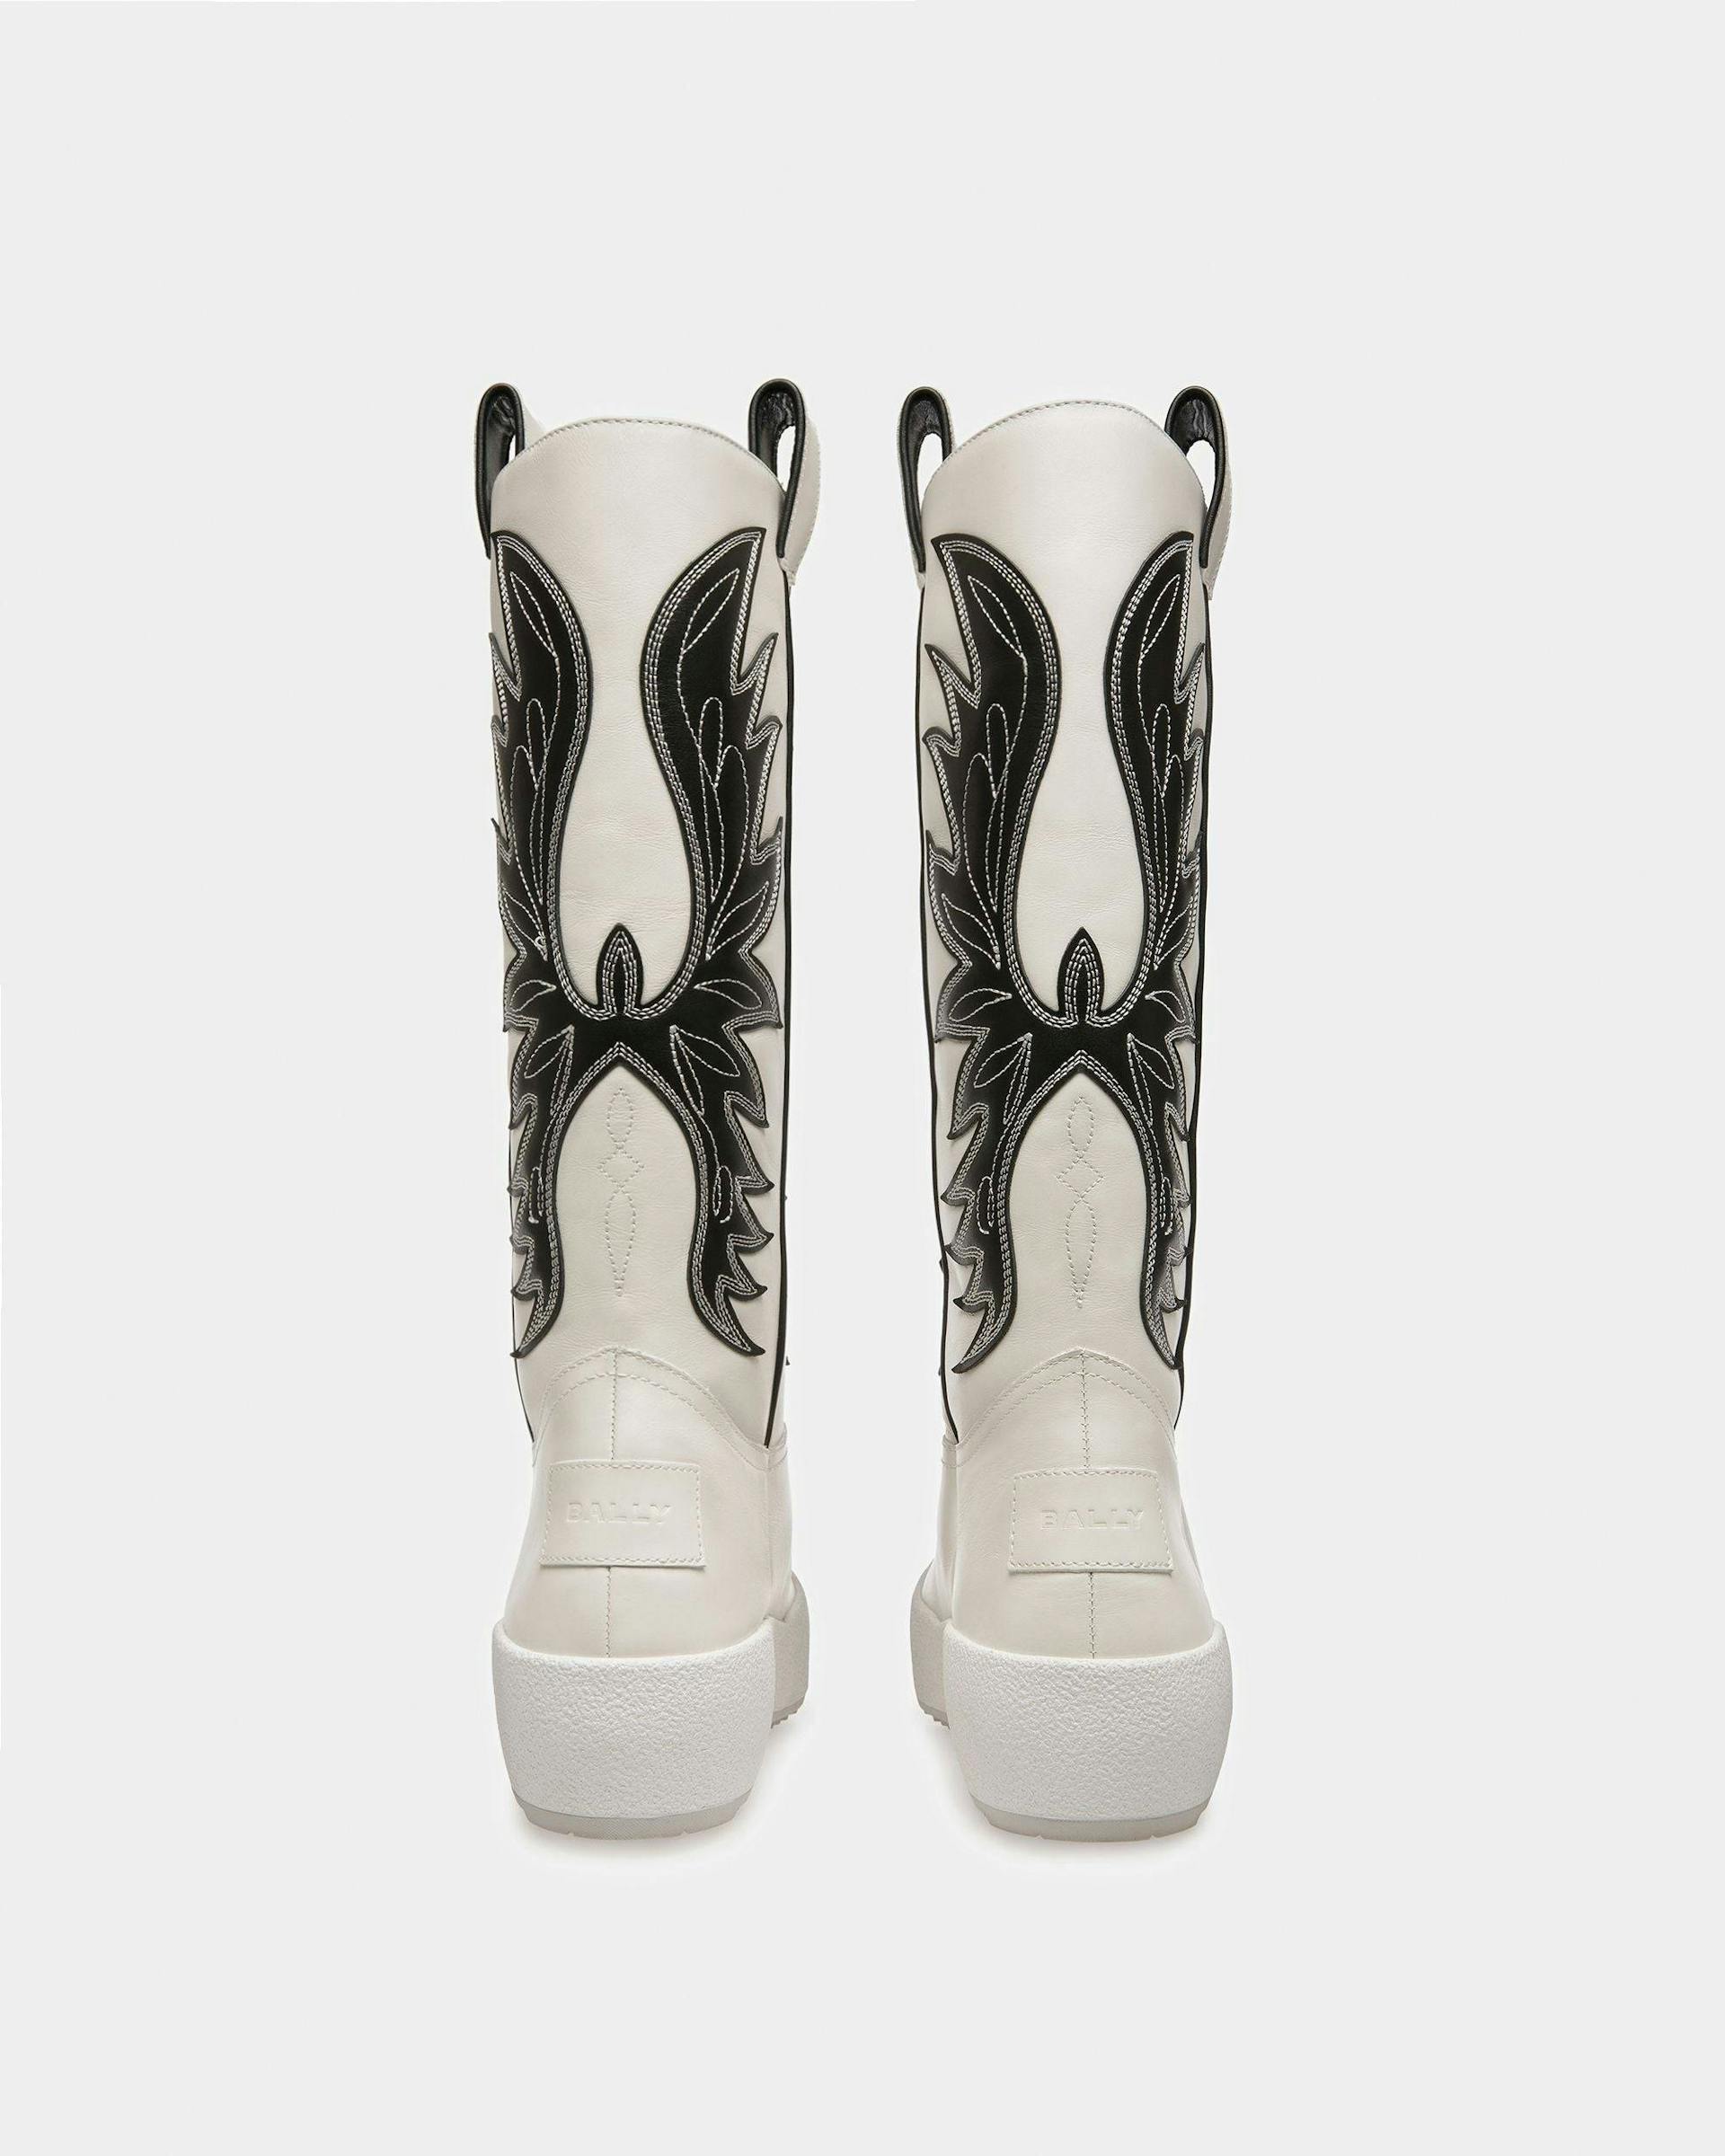 Chambery Leather Long Boots In White & Black - Women's - Bally - 09